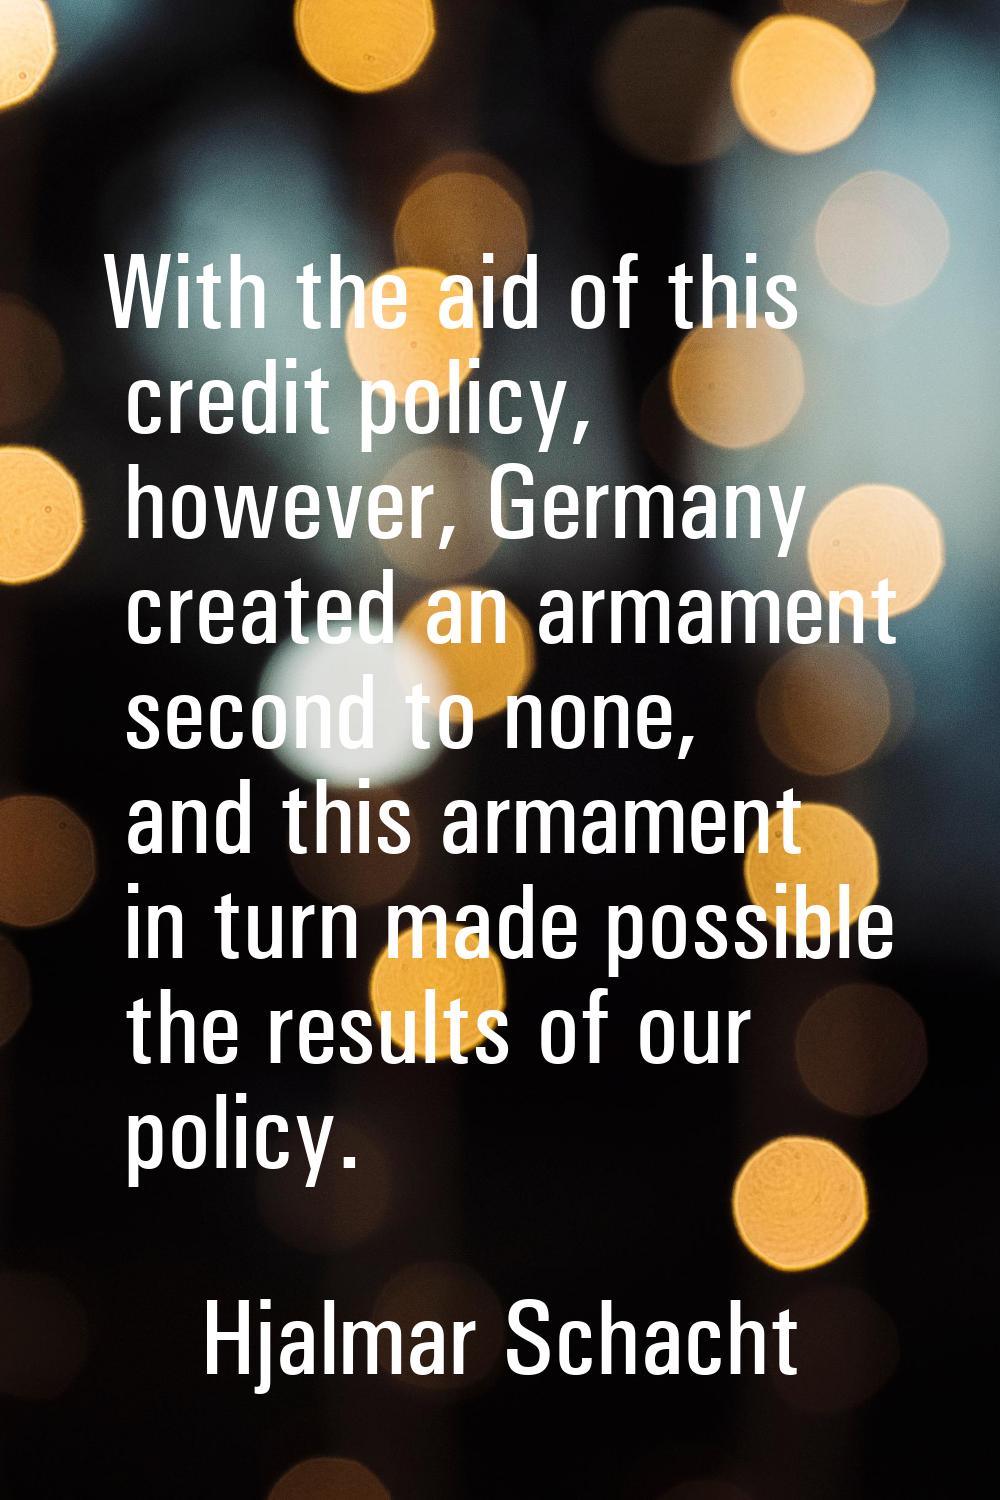 With the aid of this credit policy, however, Germany created an armament second to none, and this a